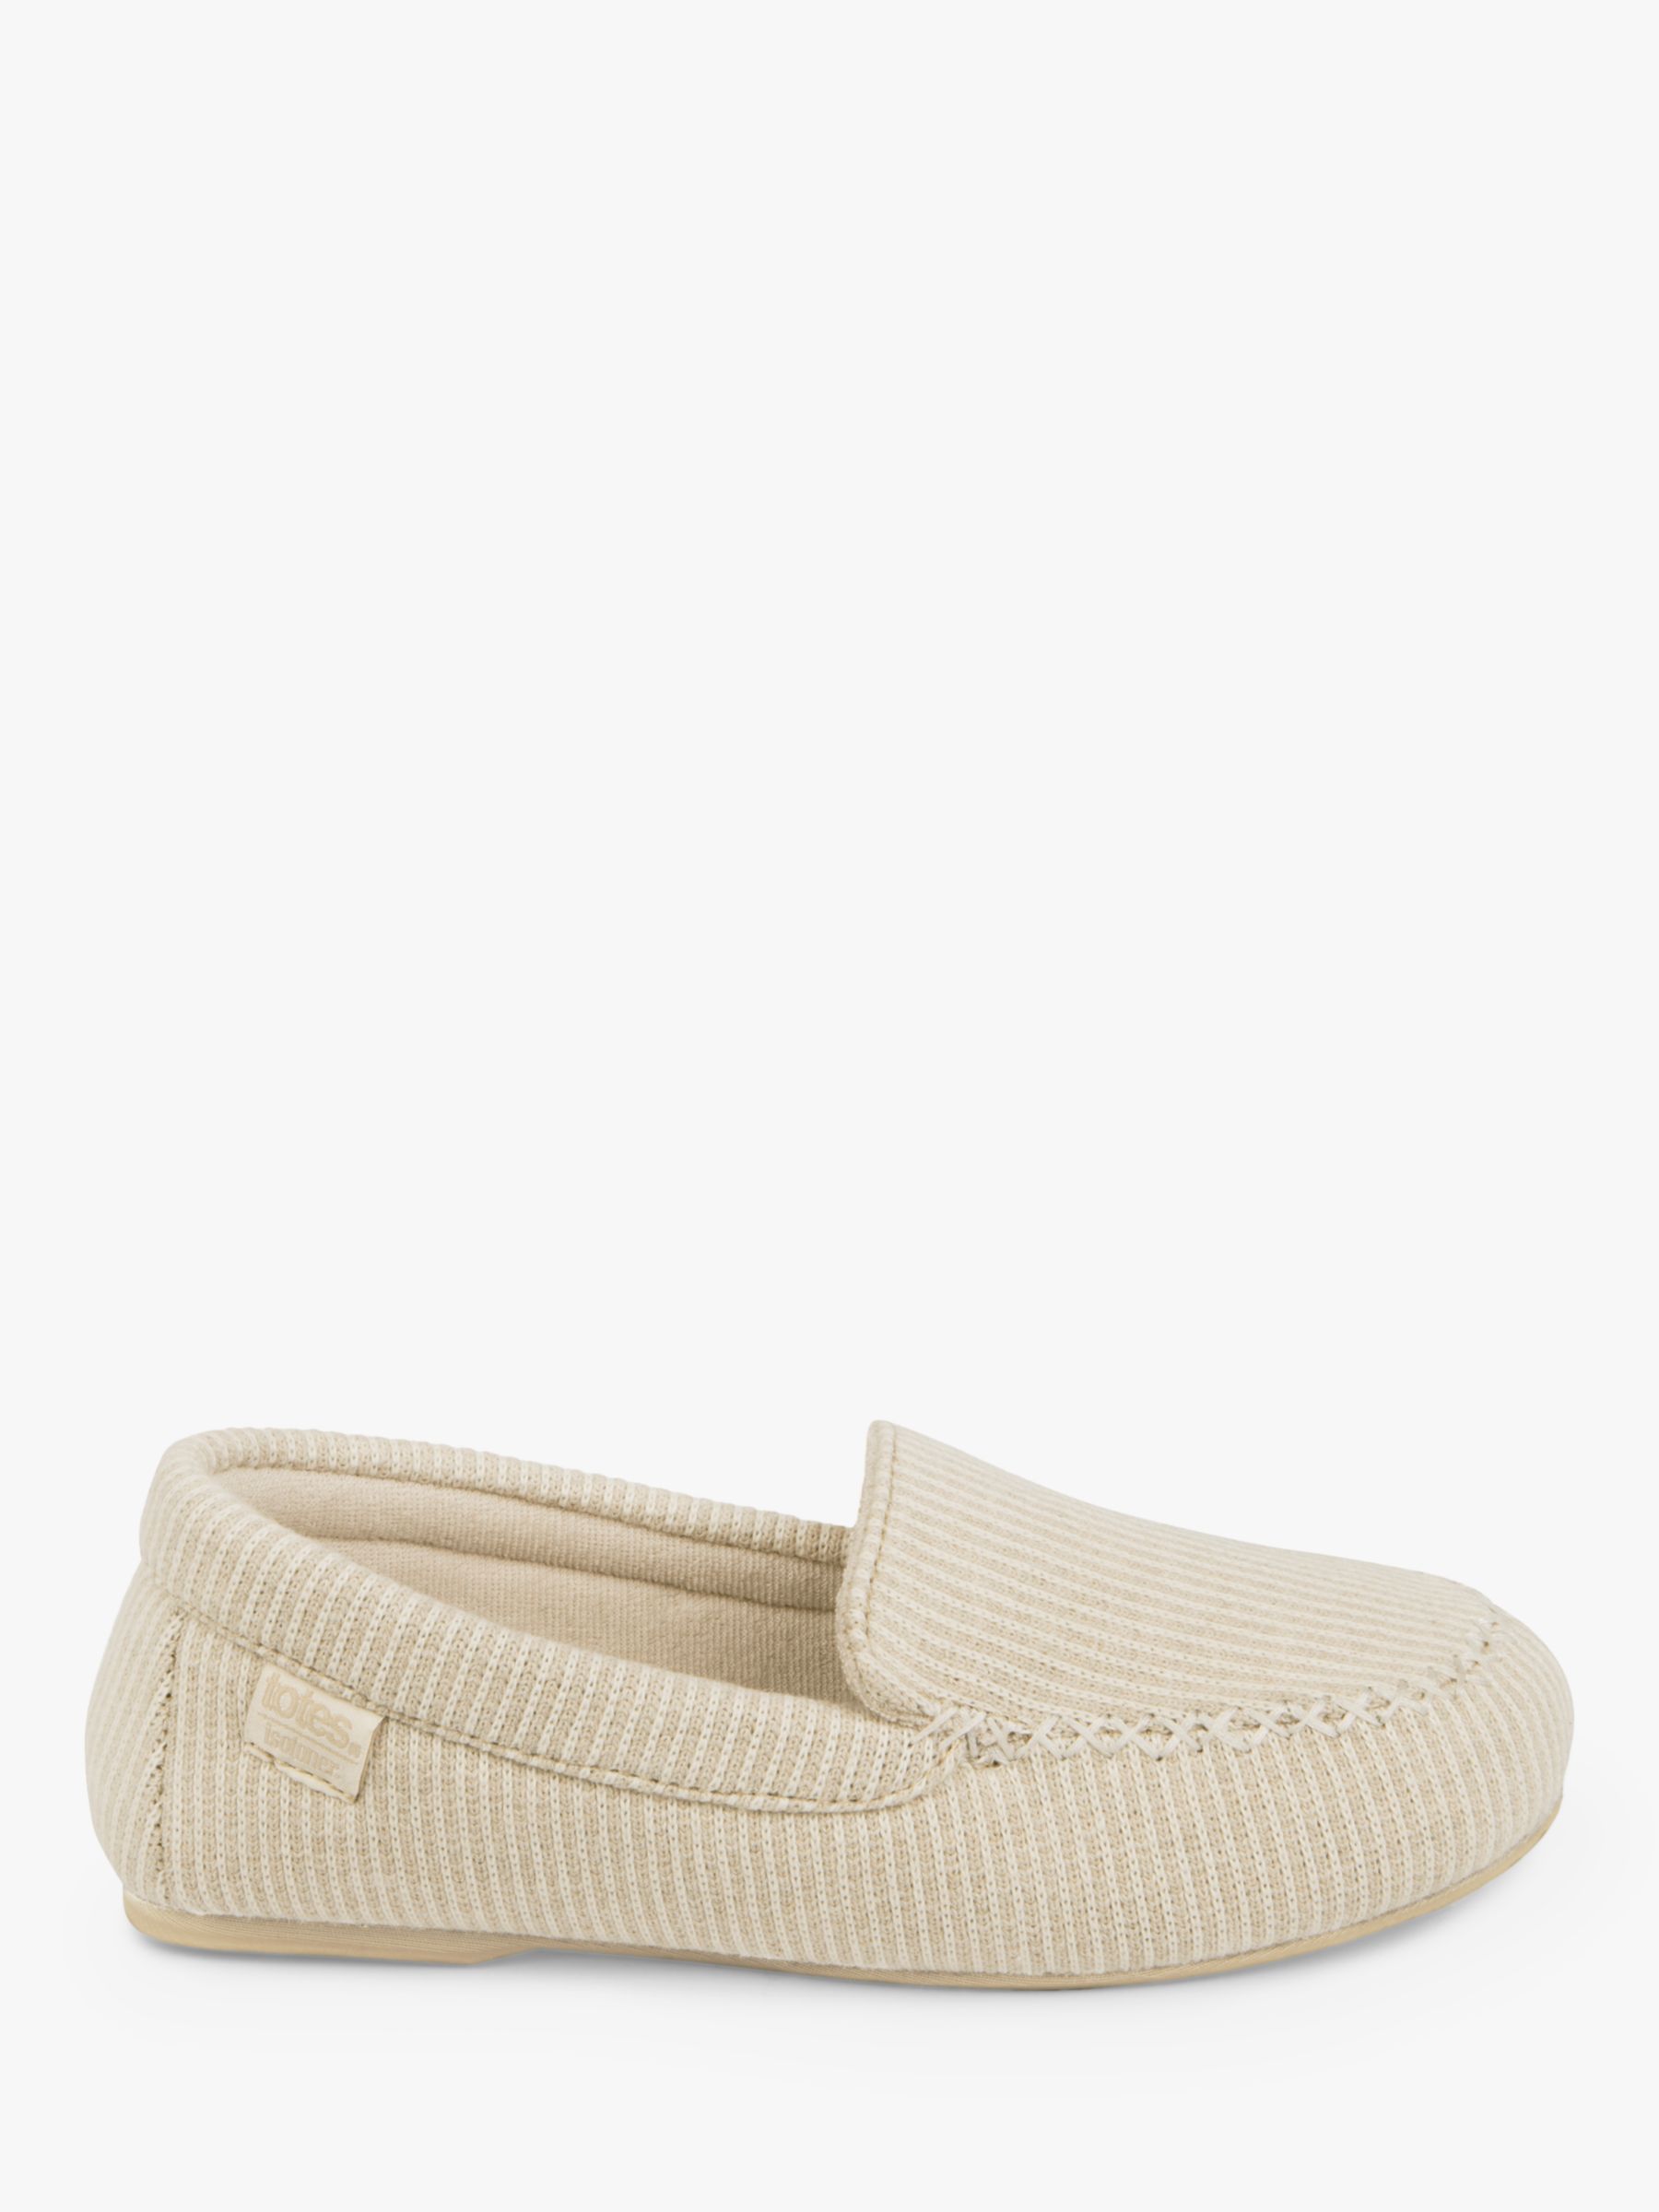 totes Textured Moccasin Slippers, Beige, 4